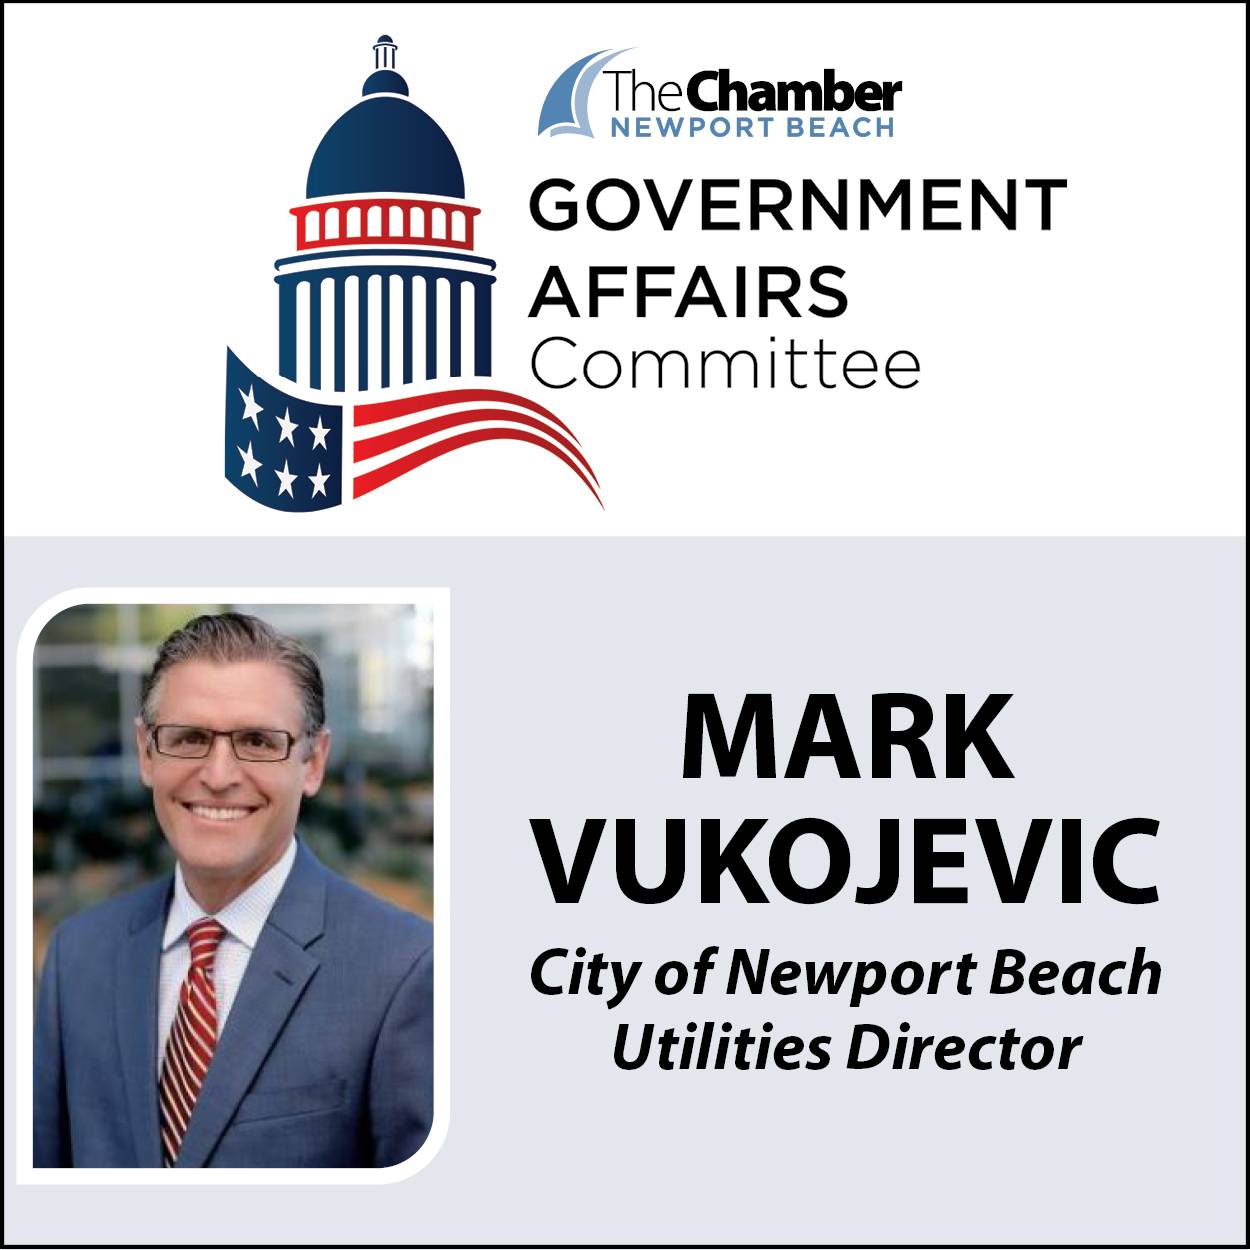 May Government Affairs Committee: City of Newport Beach Utilities Director Mark Vukojevic